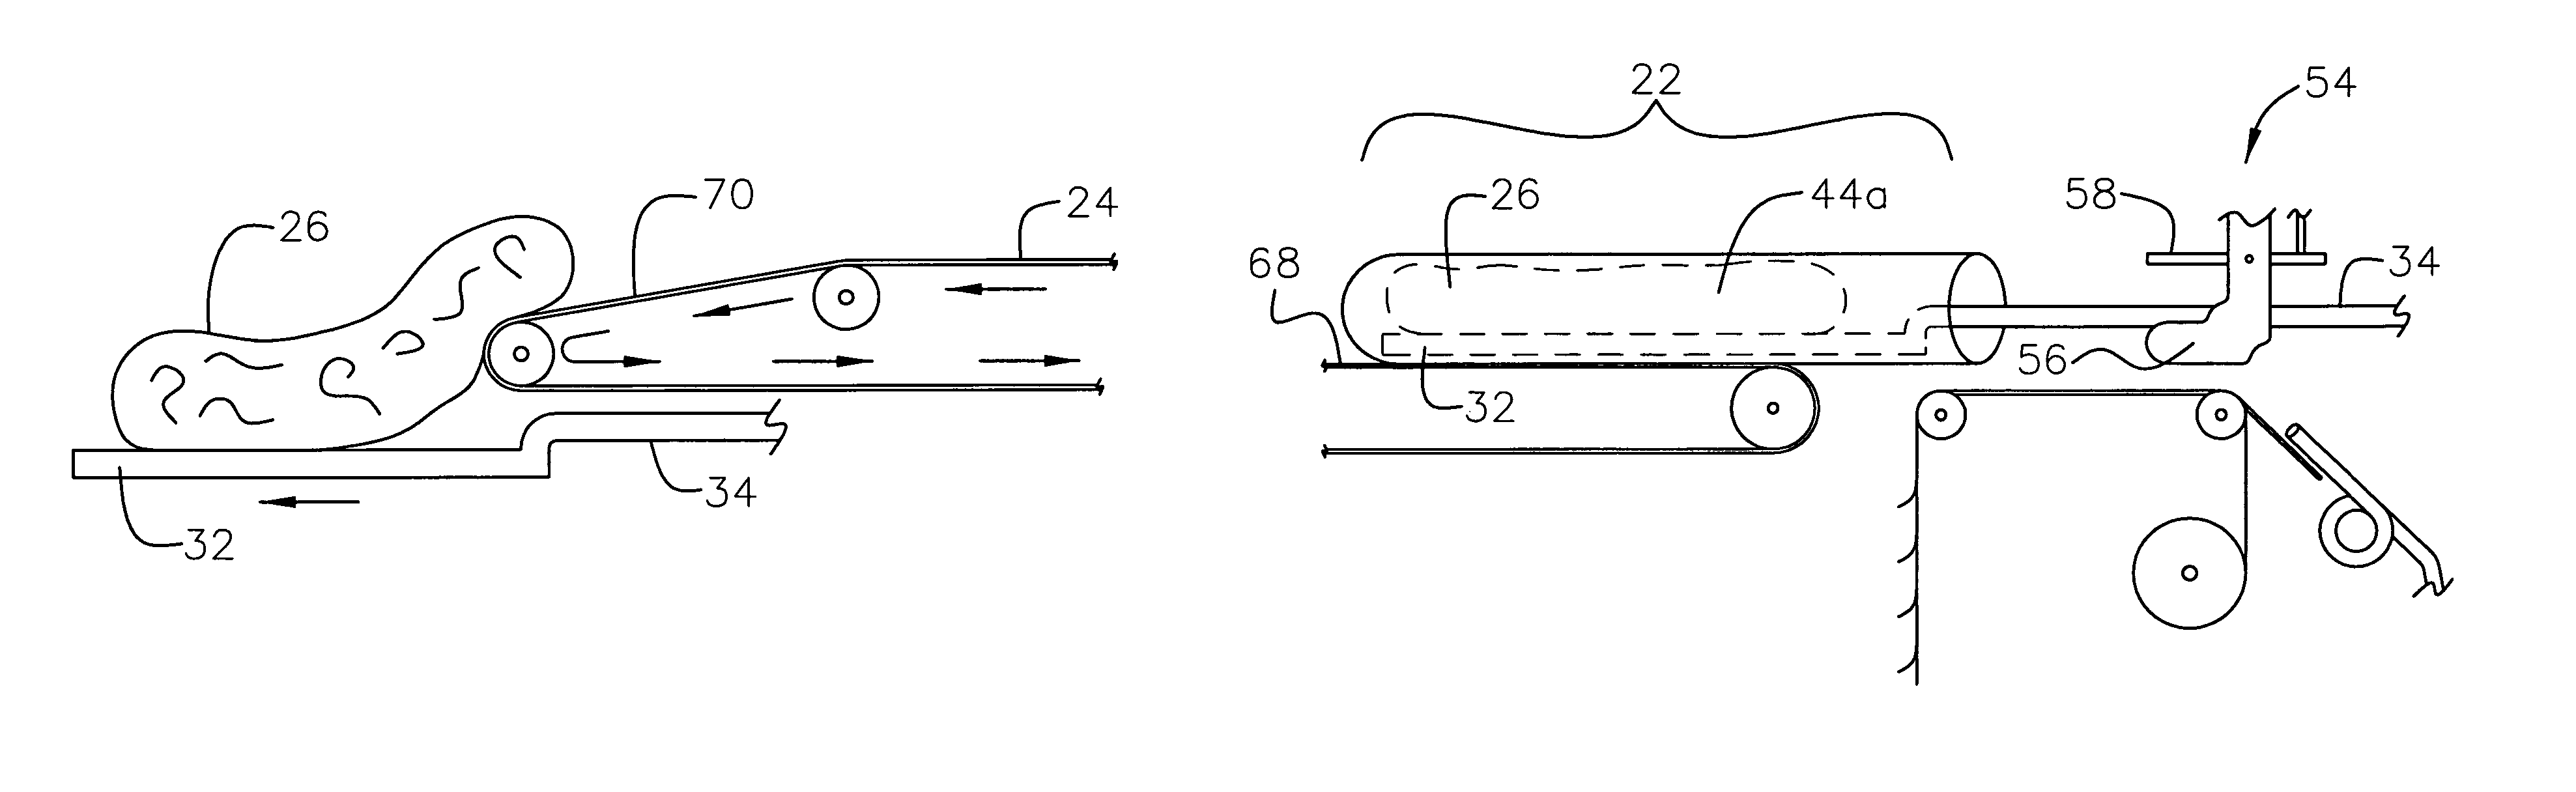 Food article packaging apparatus and method